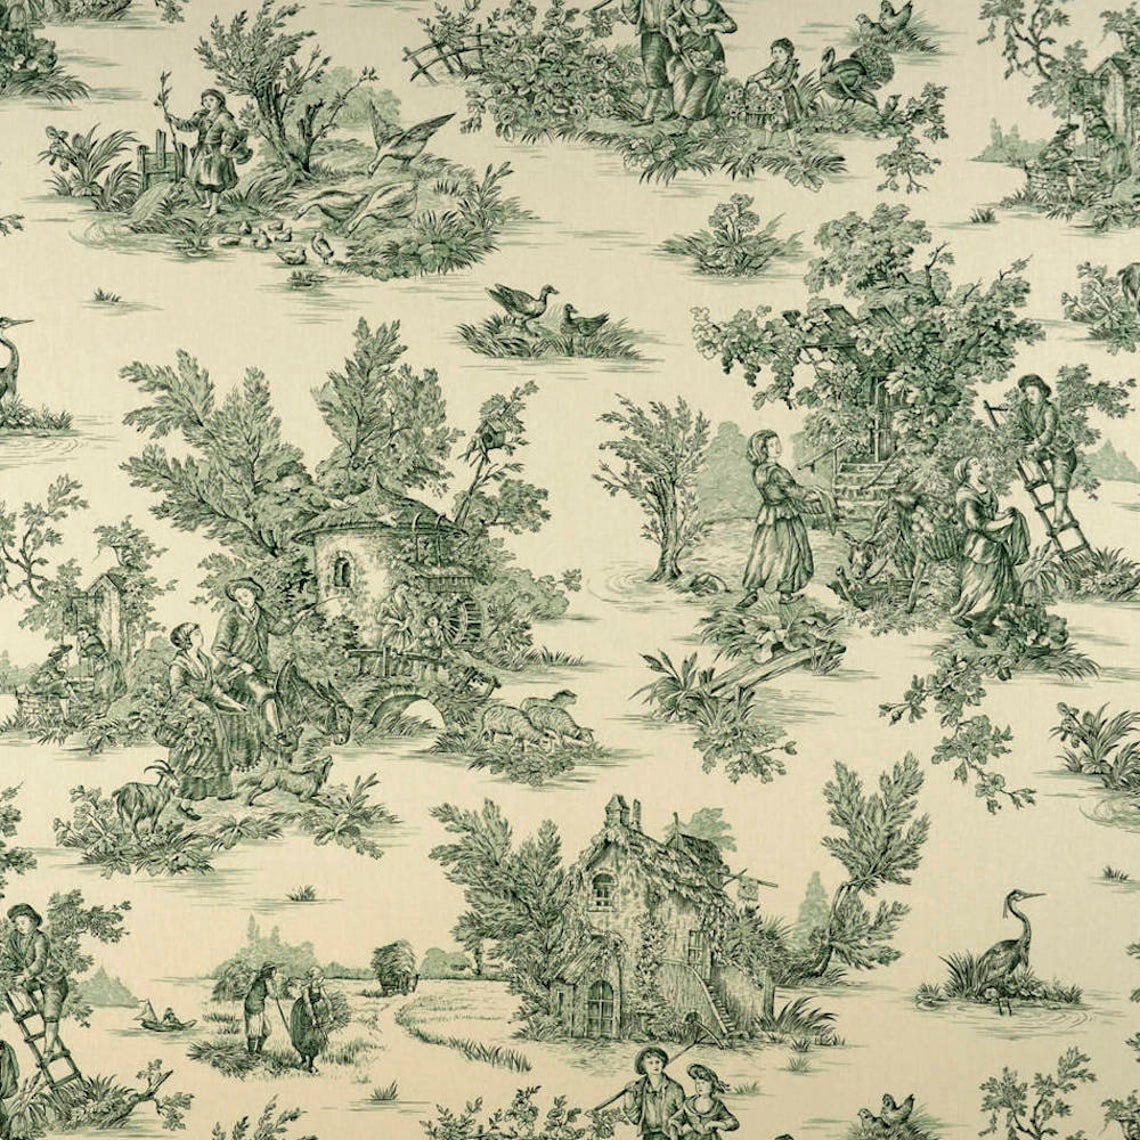 tailored valance in pastorale #3 green on cream french country toile